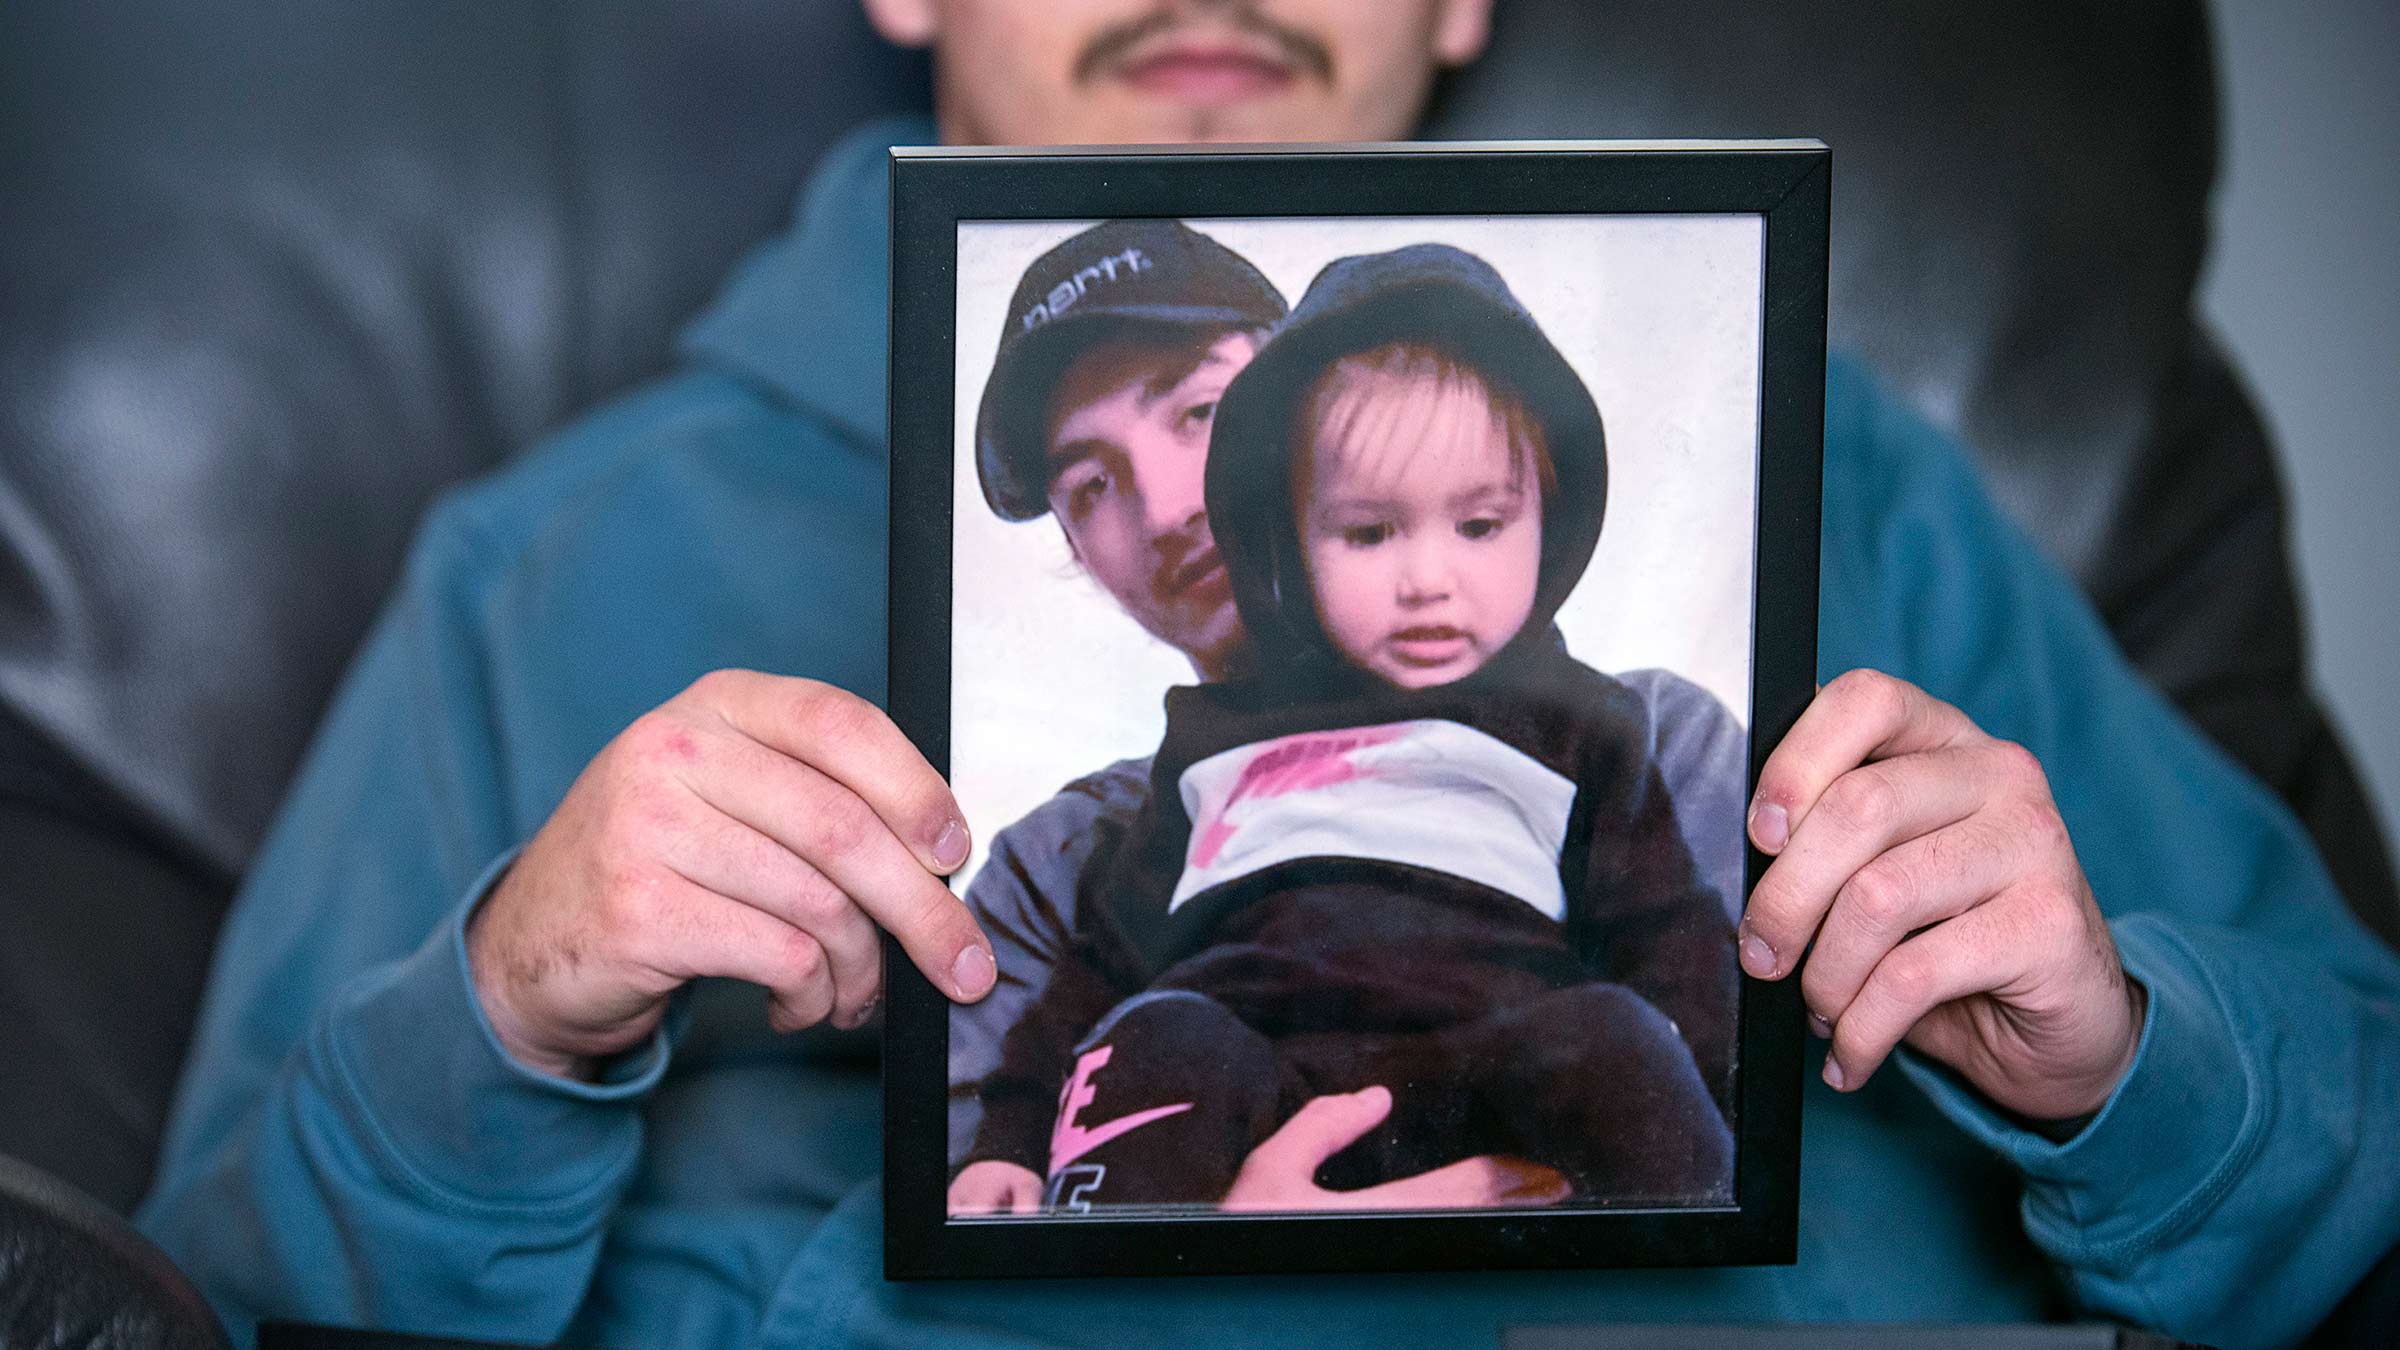 Cameron holding the photo of his daughter